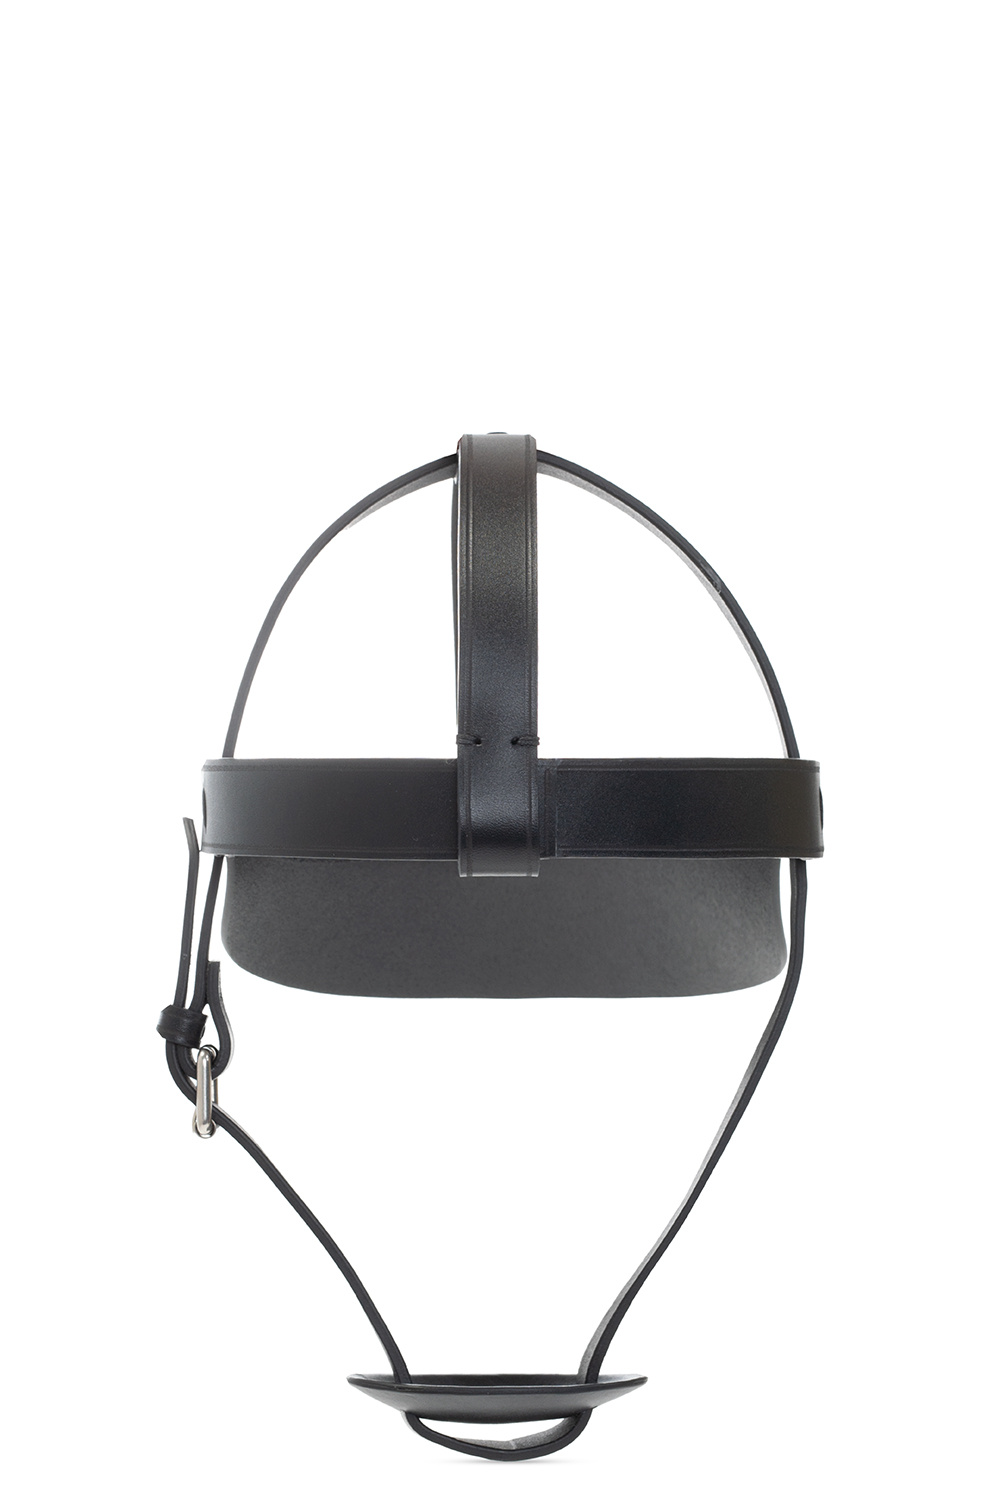 Gucci Visor with harness